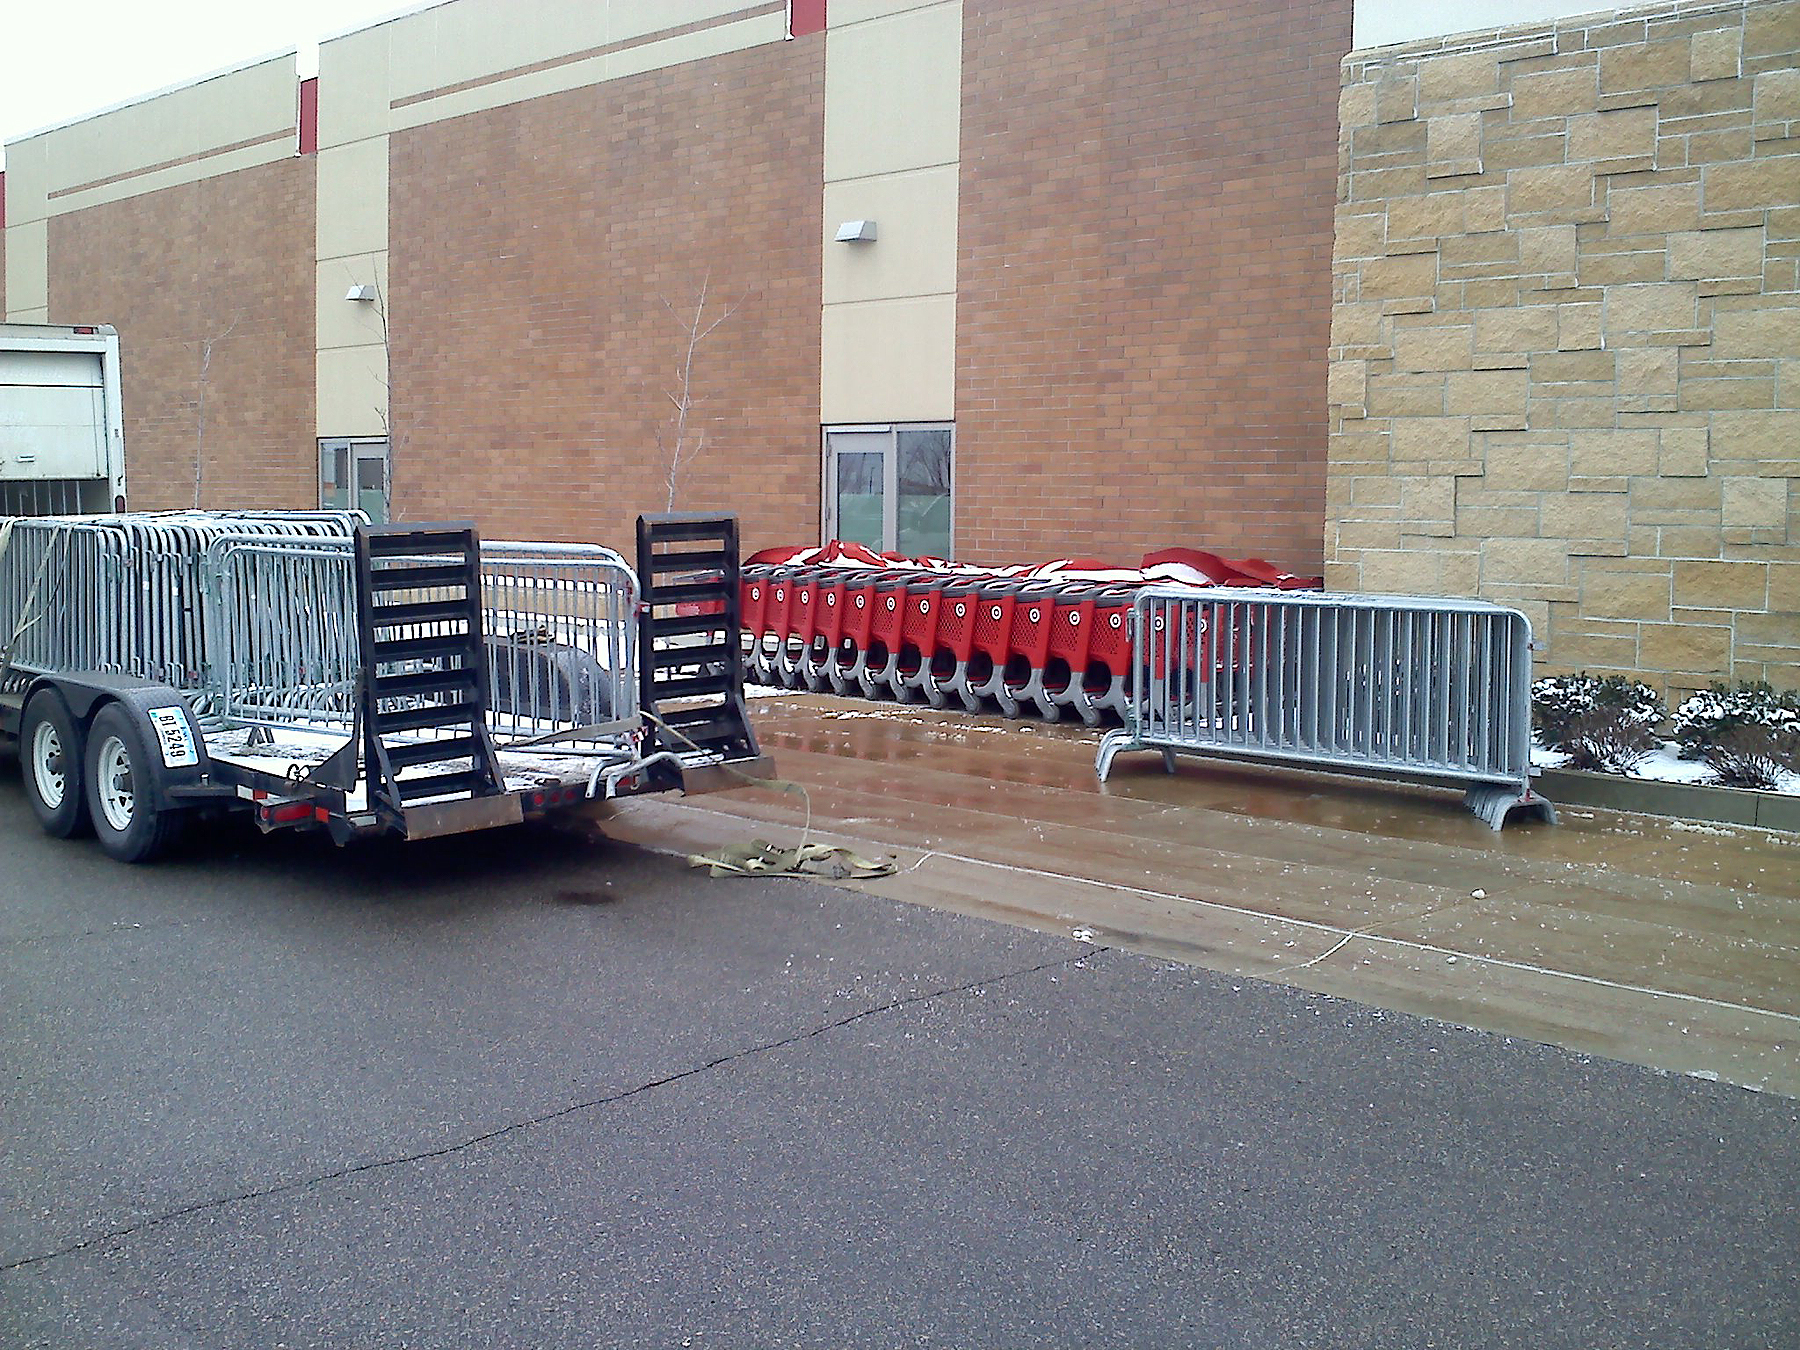 Bike barricade crowd control rental and delivery for Black Friday at Target